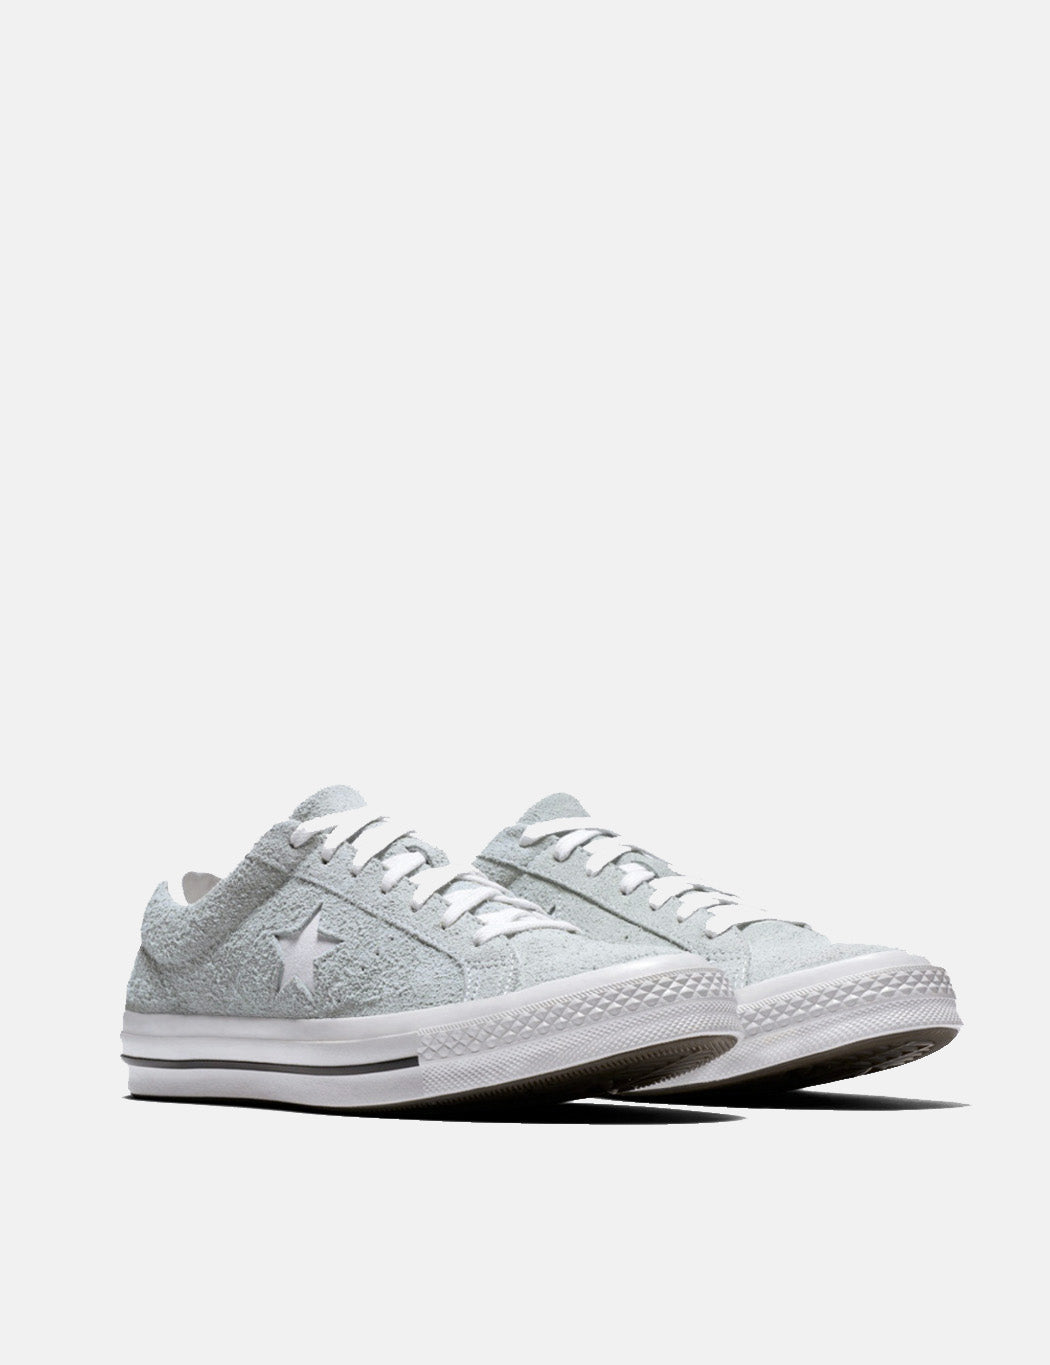 converse one star dx ox